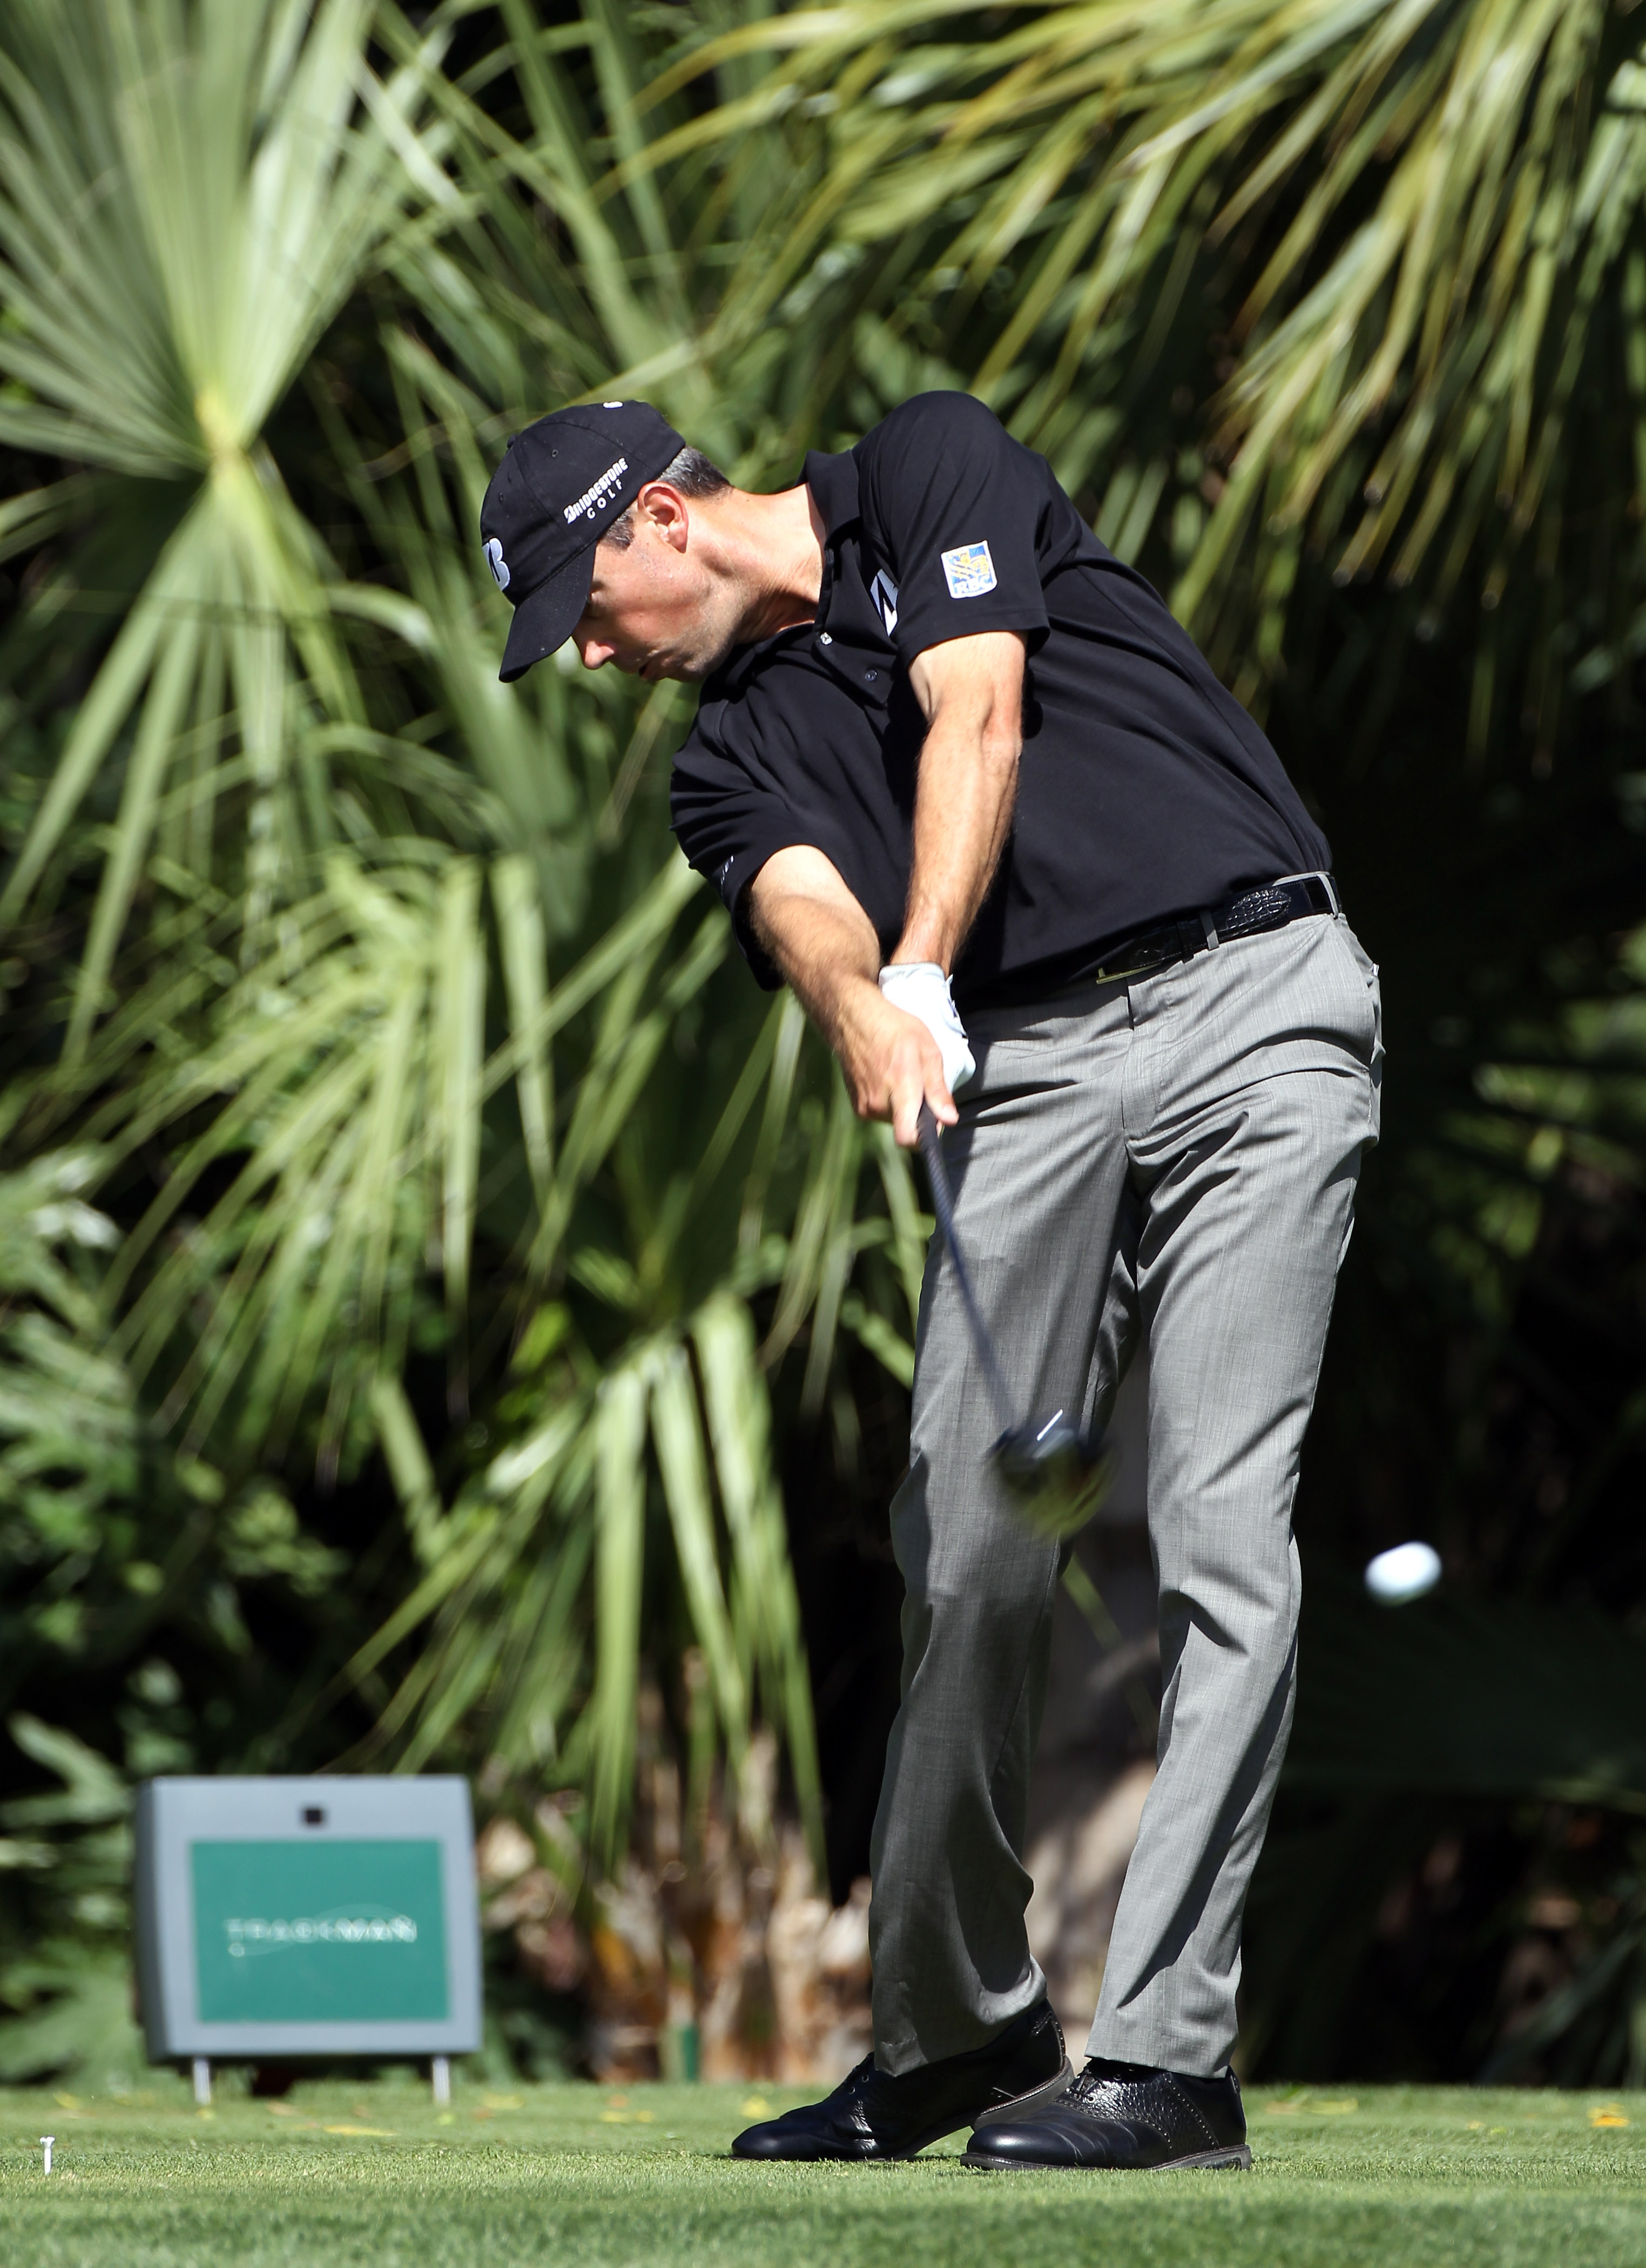 PALM BEACH GARDENS, FL - MARCH 04:  Matt Kuchar plays a shot on the 3rd hole during the second round of The Honda Classic at PGA National Resort and Spa on March 4, 2011 in Palm Beach Gardens, Florida.  (Photo by Sam Greenwood/Getty Images)